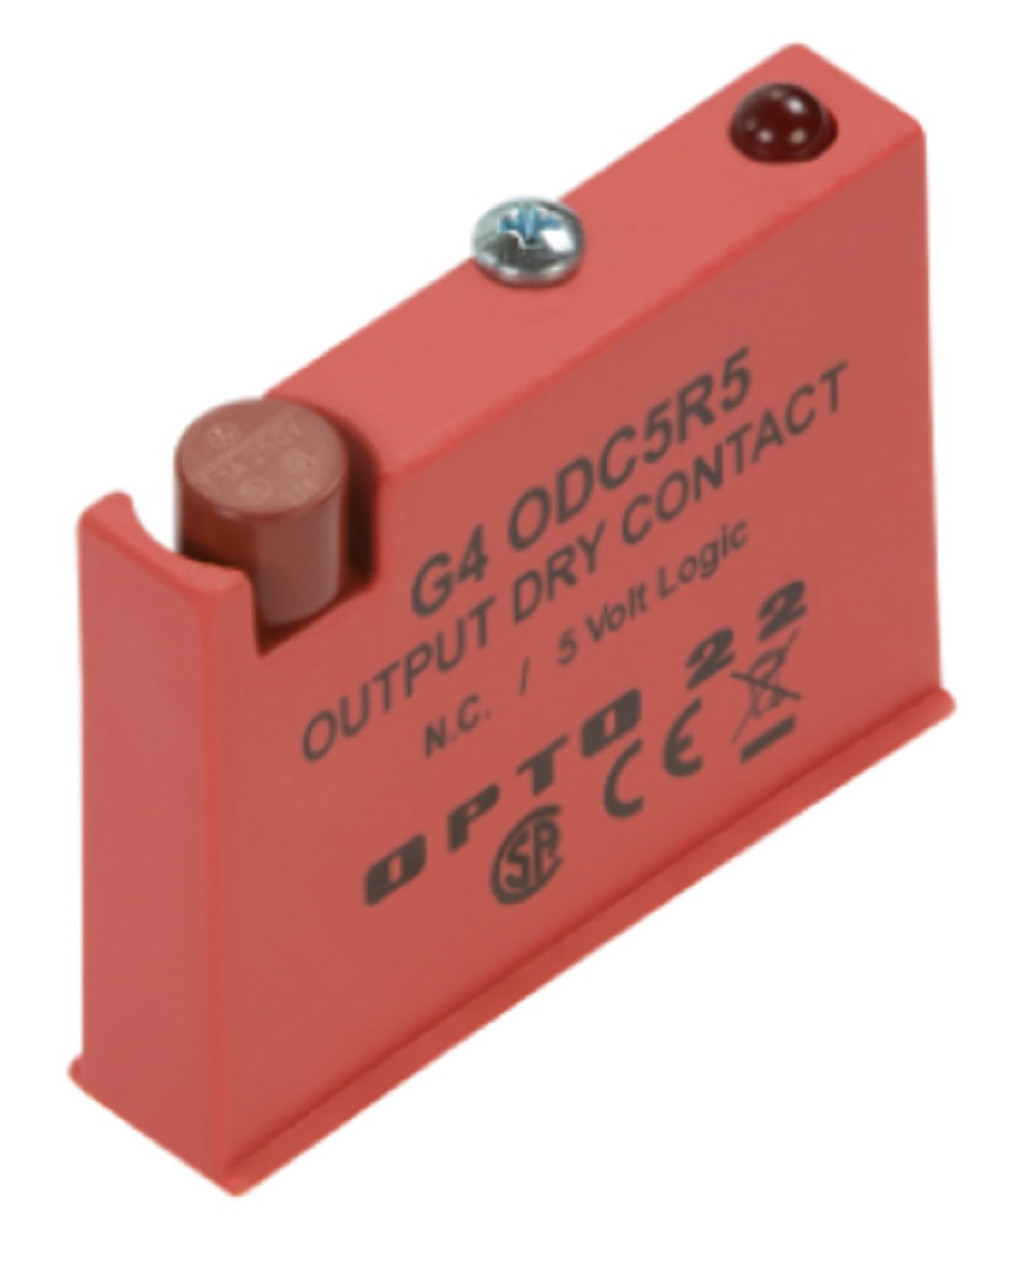 Opto 22 G4ODC5R5 G4 Low-Voltage Mechanical Relay Output, 5 VDC Logic, N.O. [Refurbished]